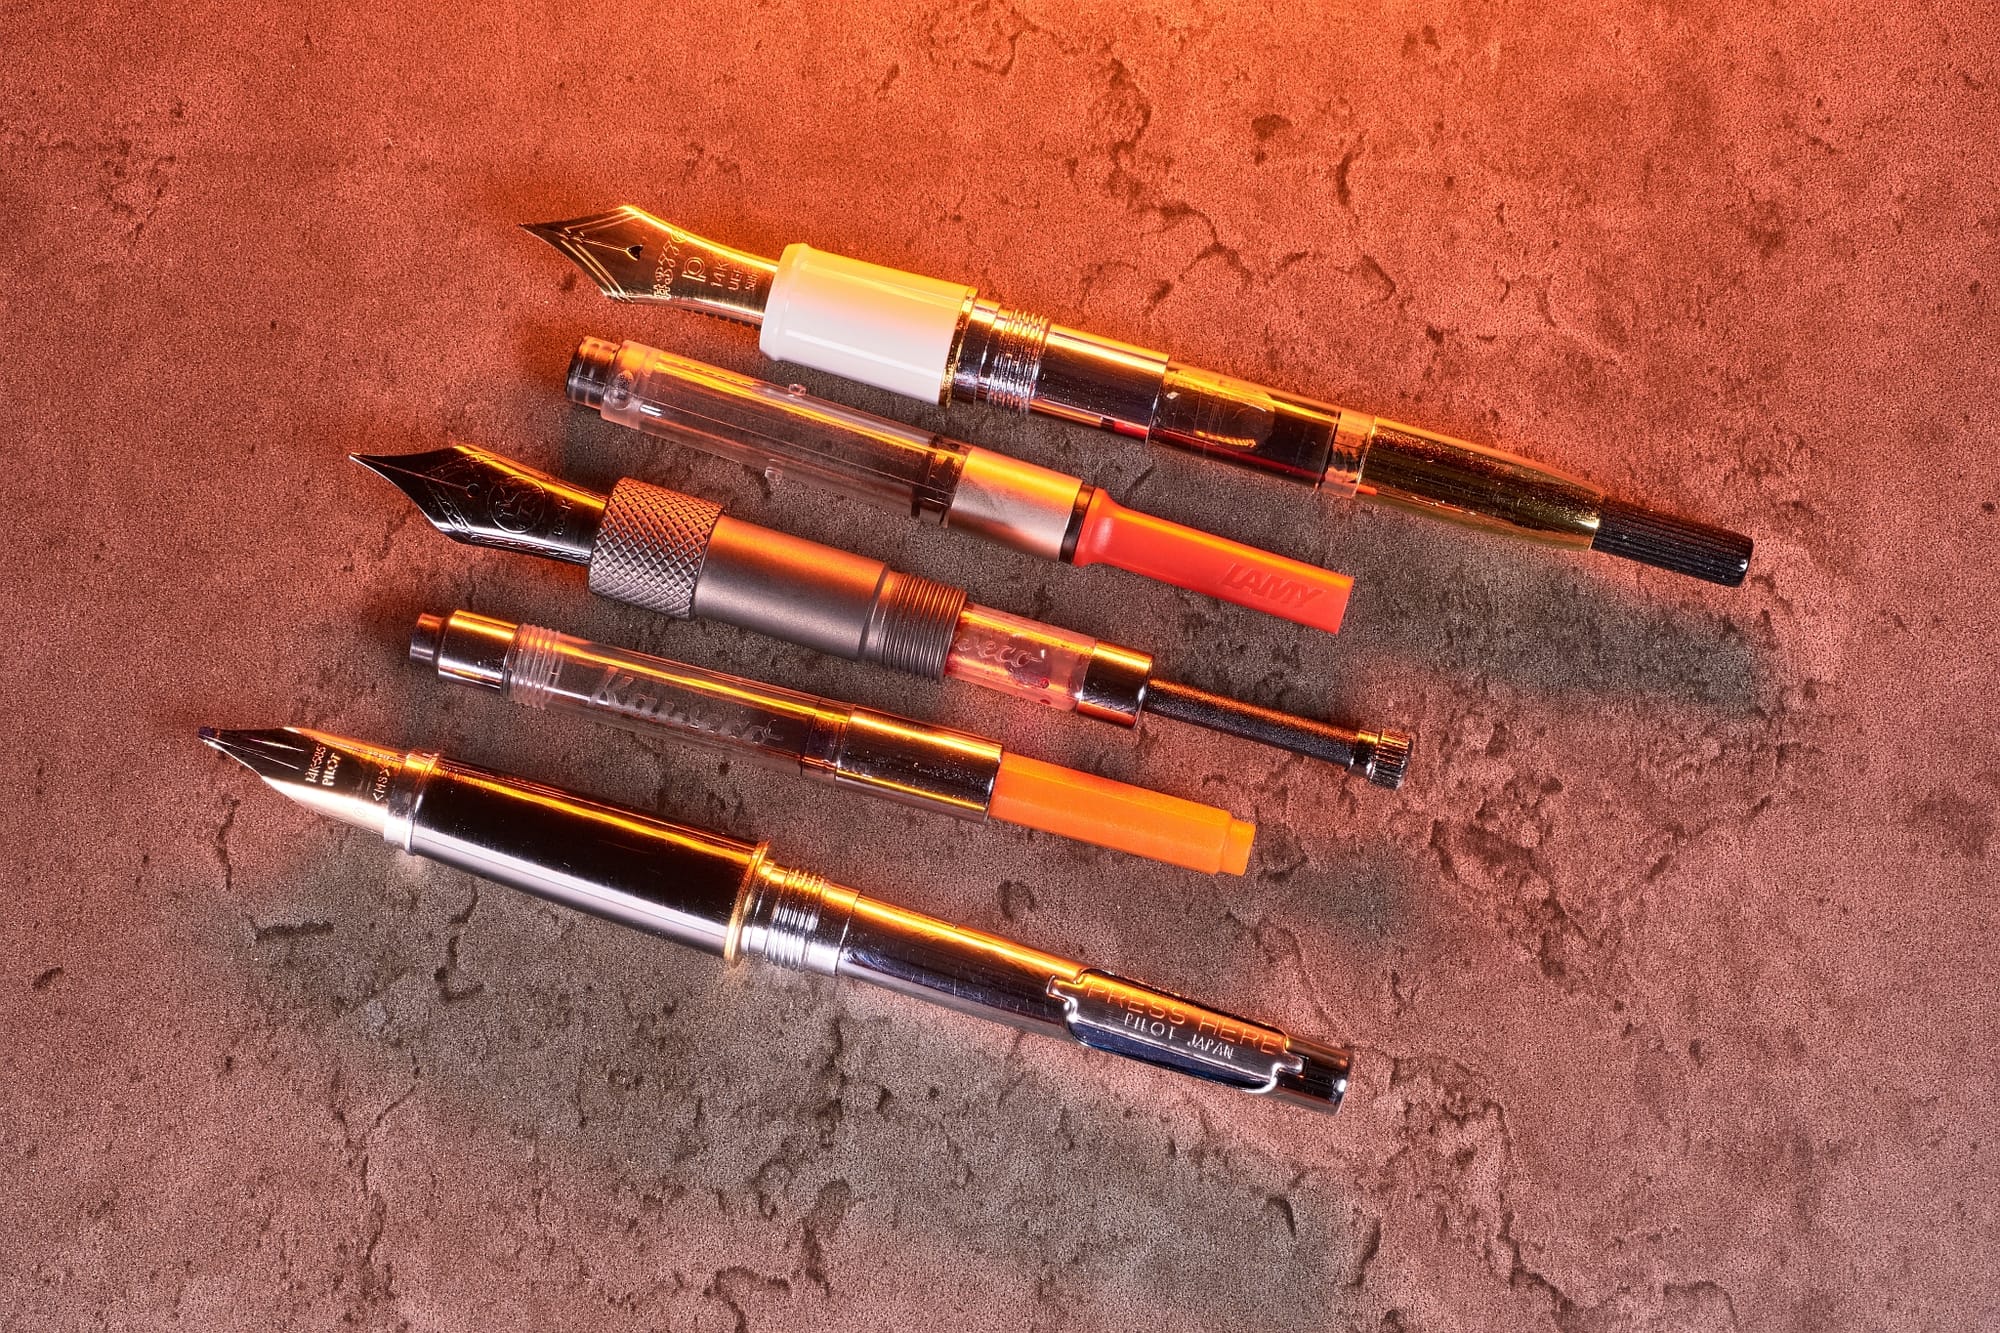 Photo of 3 different types of converters attached to pens, plus 2 different loose converters.